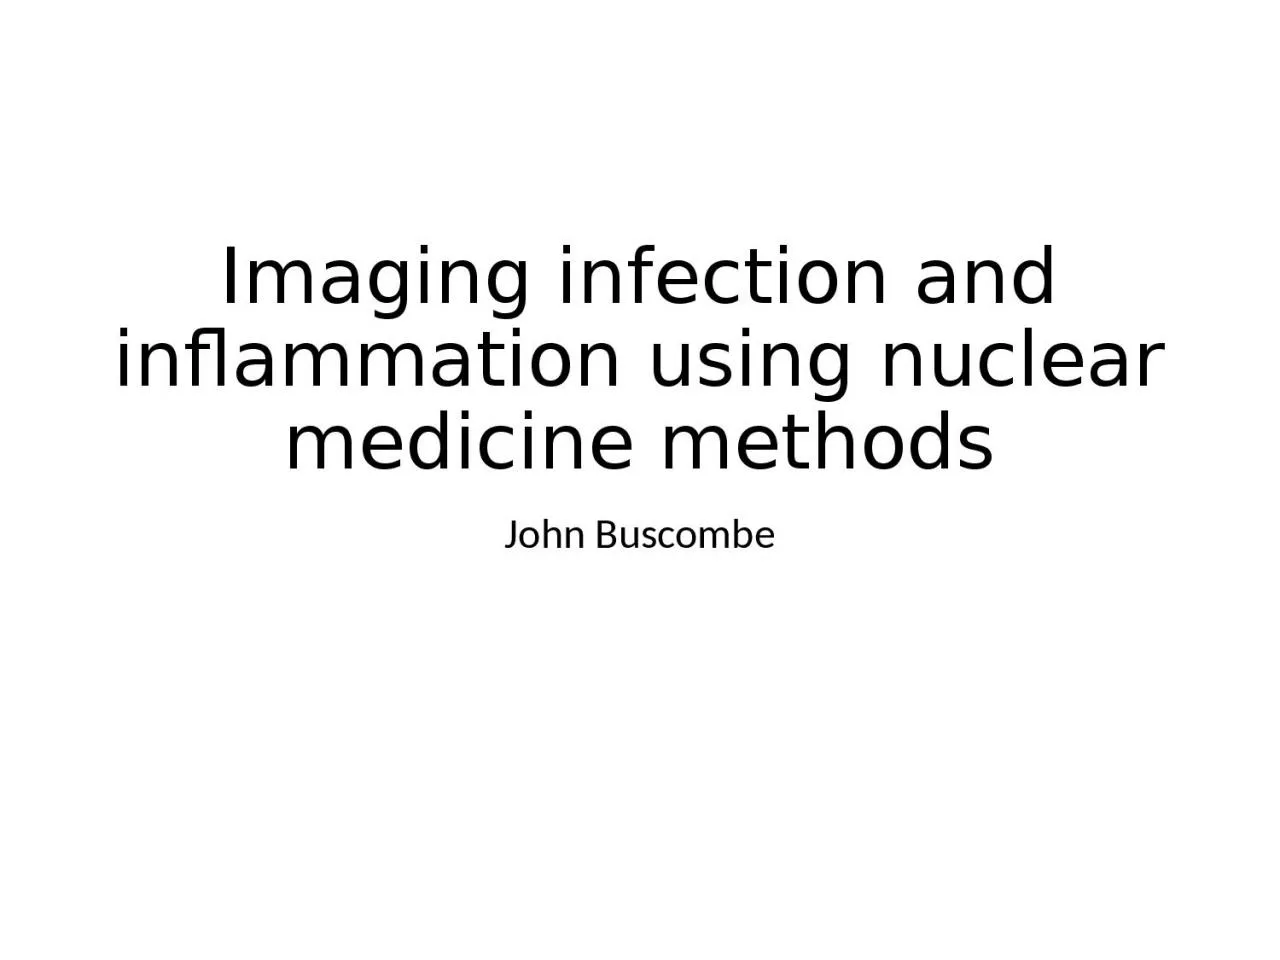 Imaging infection and inflammation using nuclear medicine methods